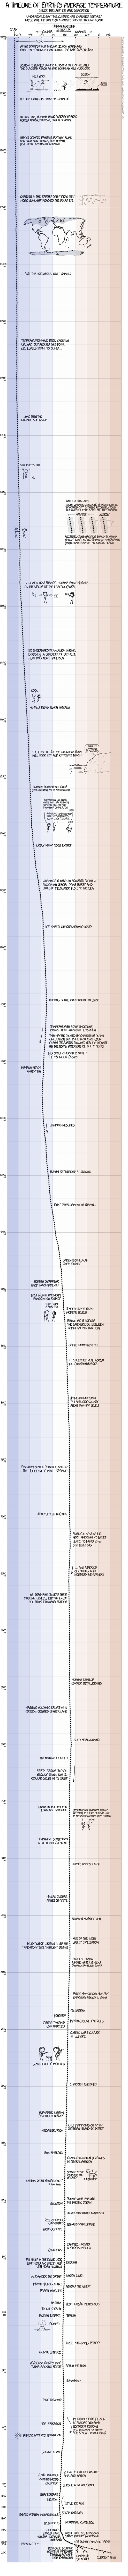 Image not found. Find the original here: https://xkcd.com/1732/